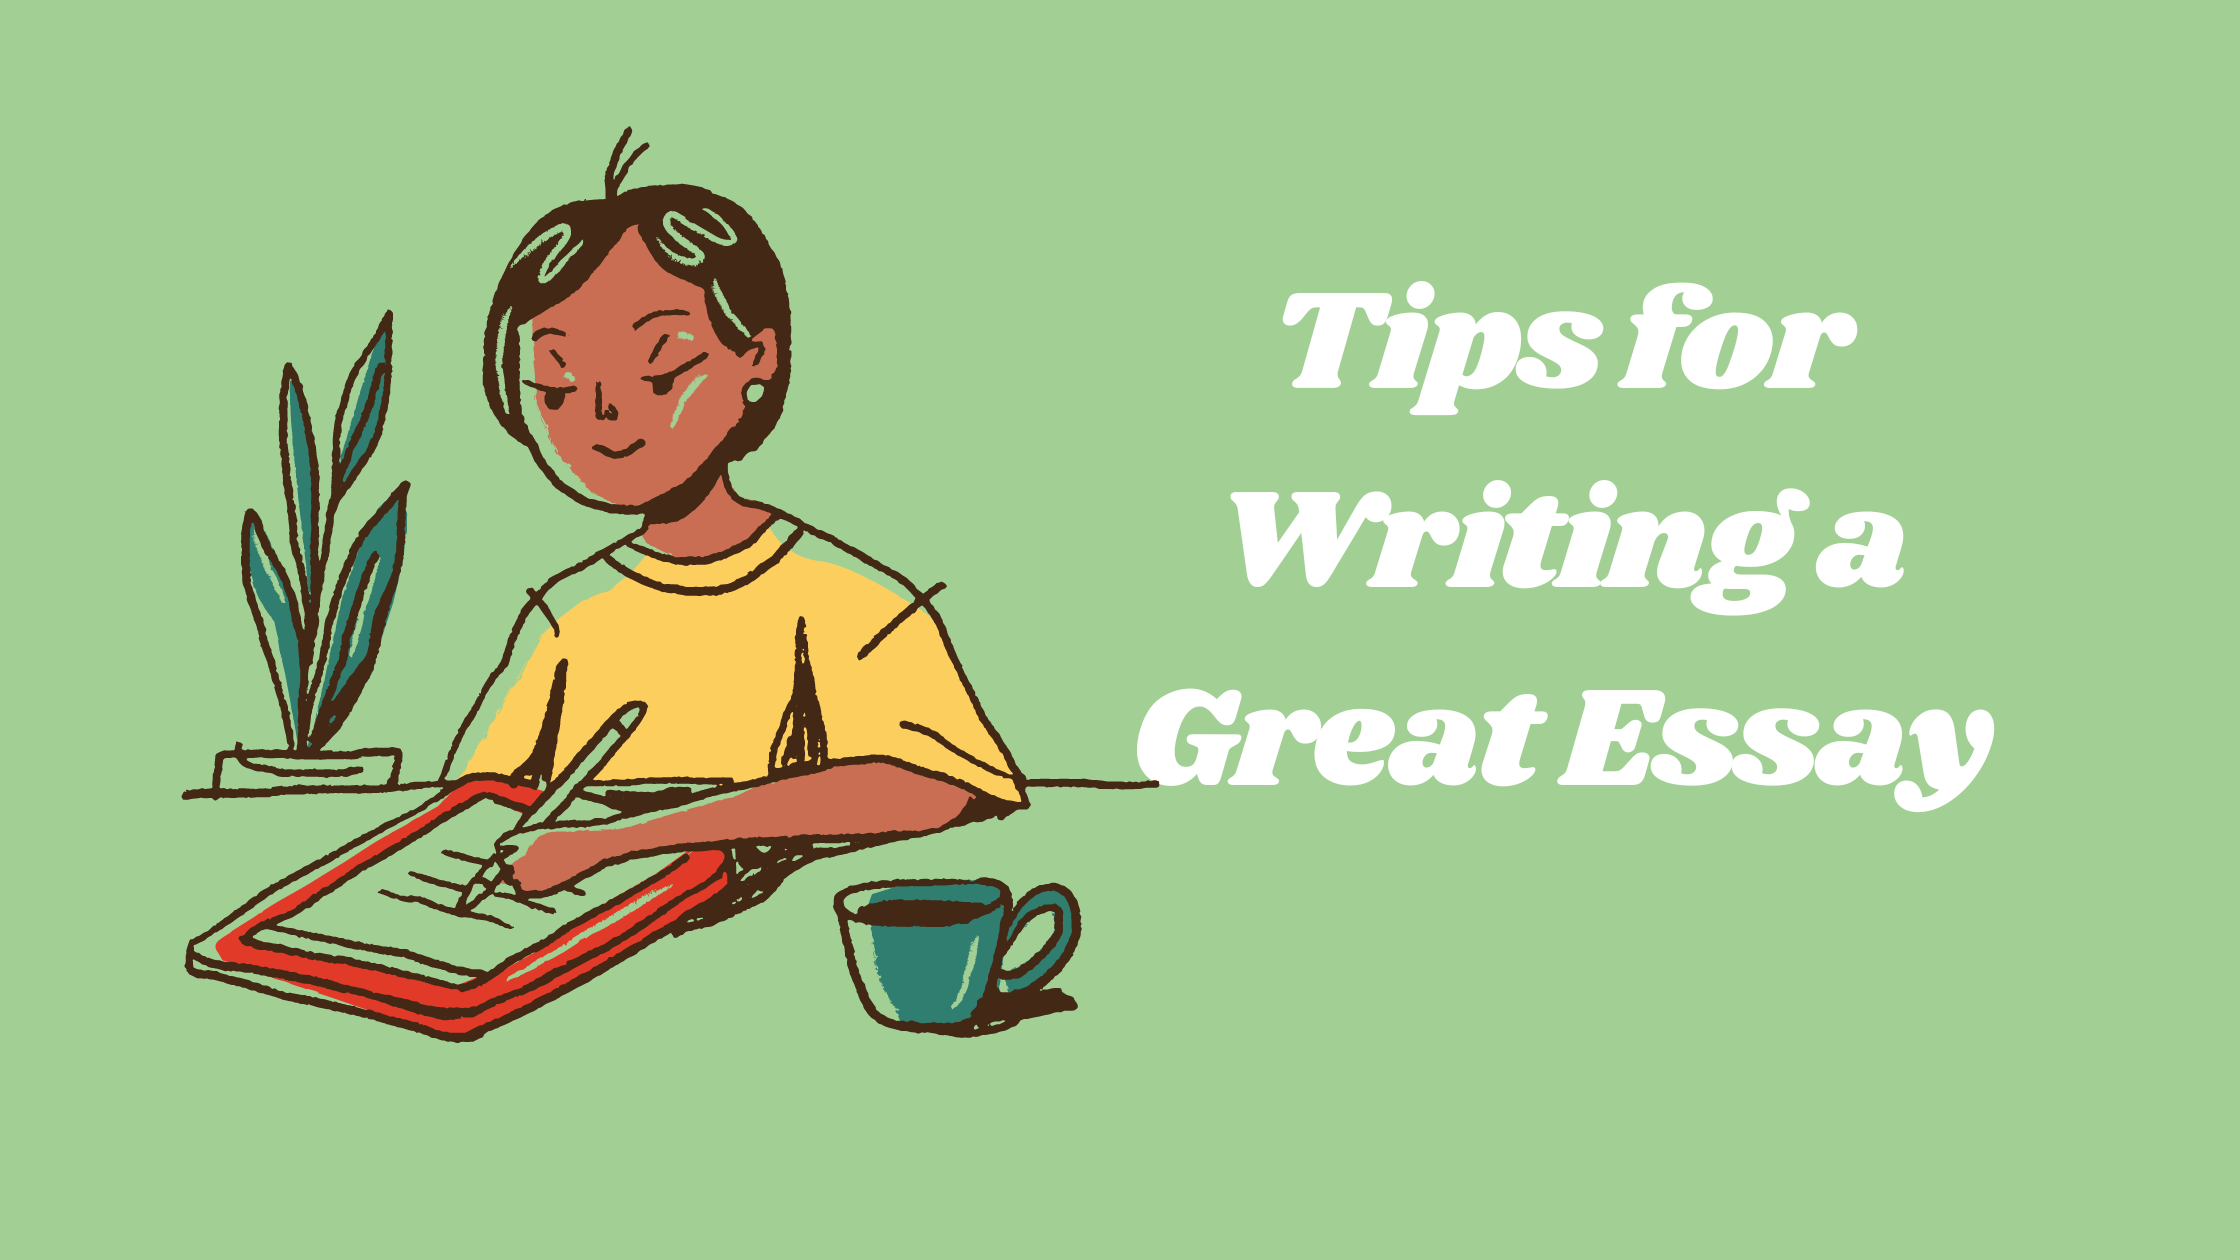 Tips for Writing a Great Essay